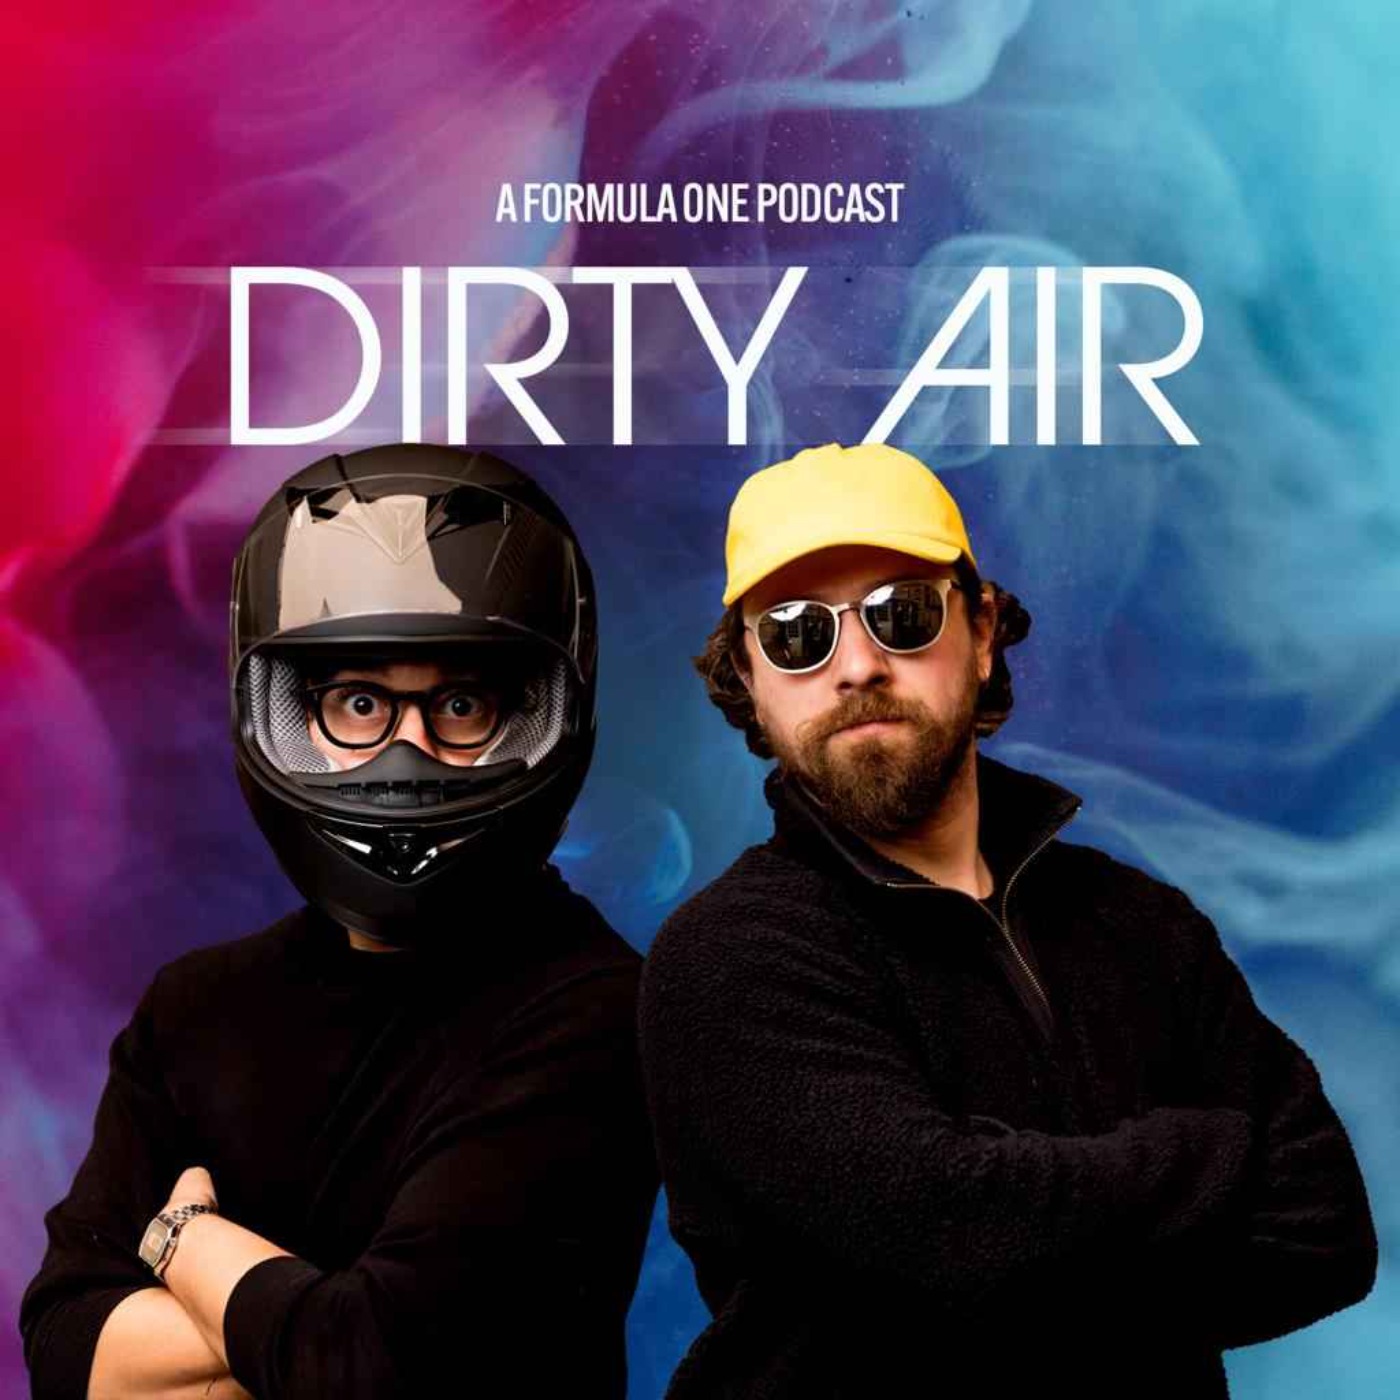 Dirty Air F1 podcast show image